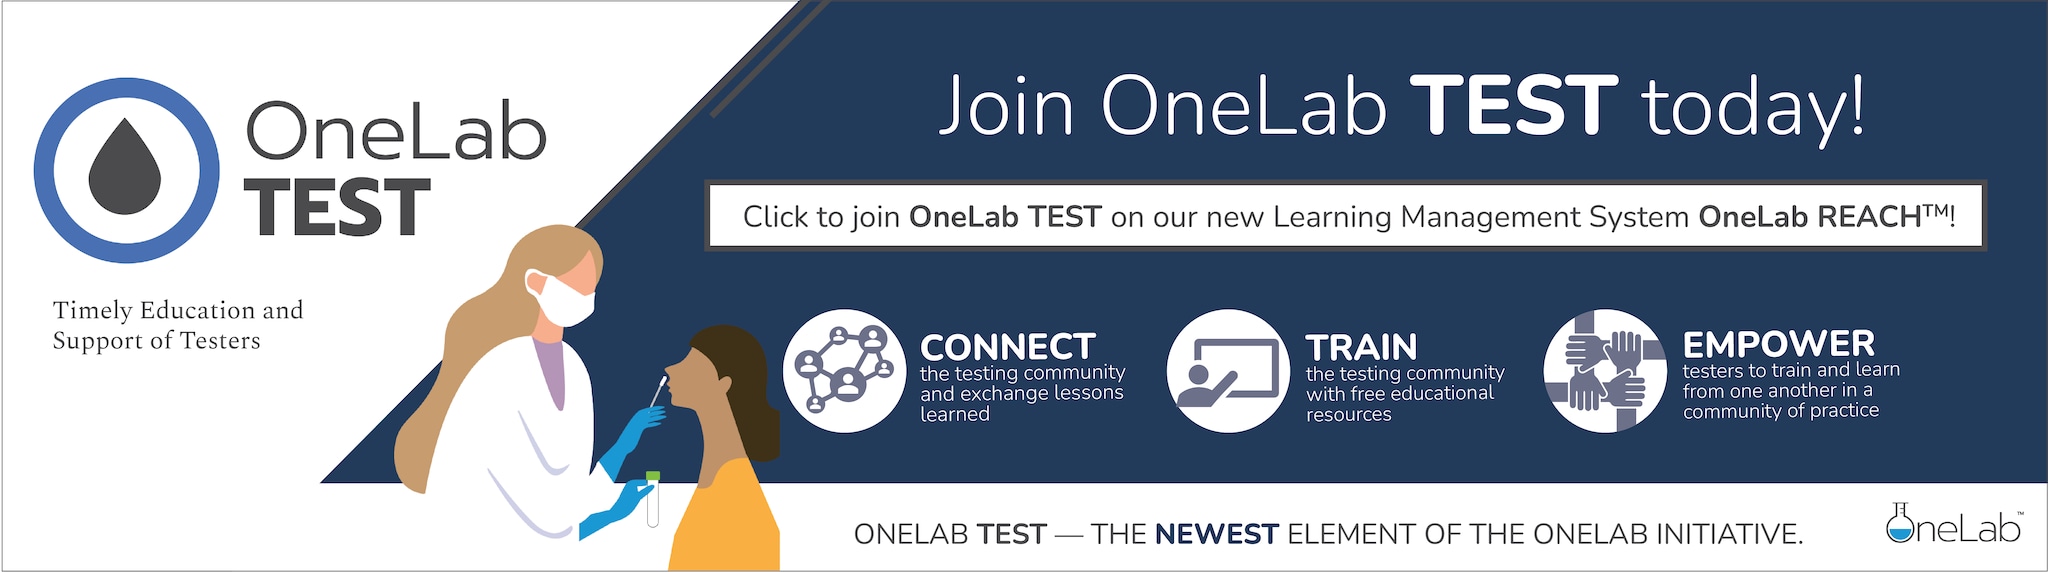 Banner image advertising the new OneLab REACH system with man holding pen & notepad and OneLab logo.